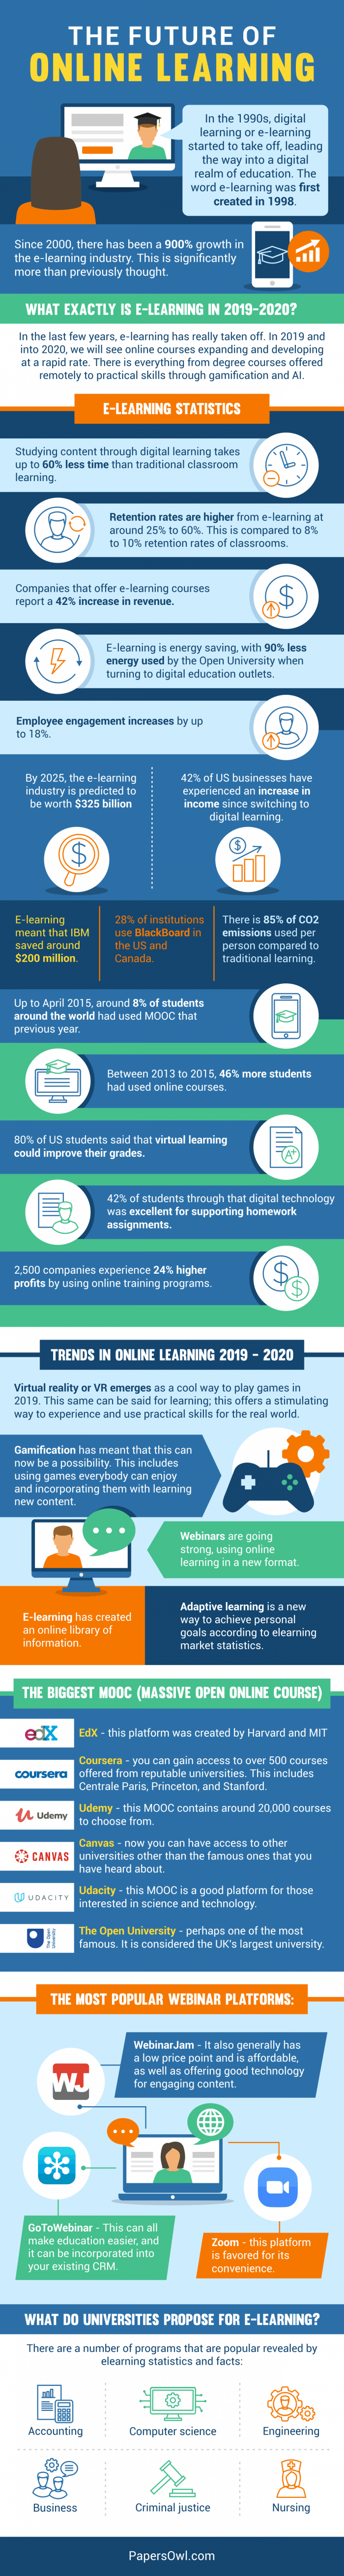 future of online learning